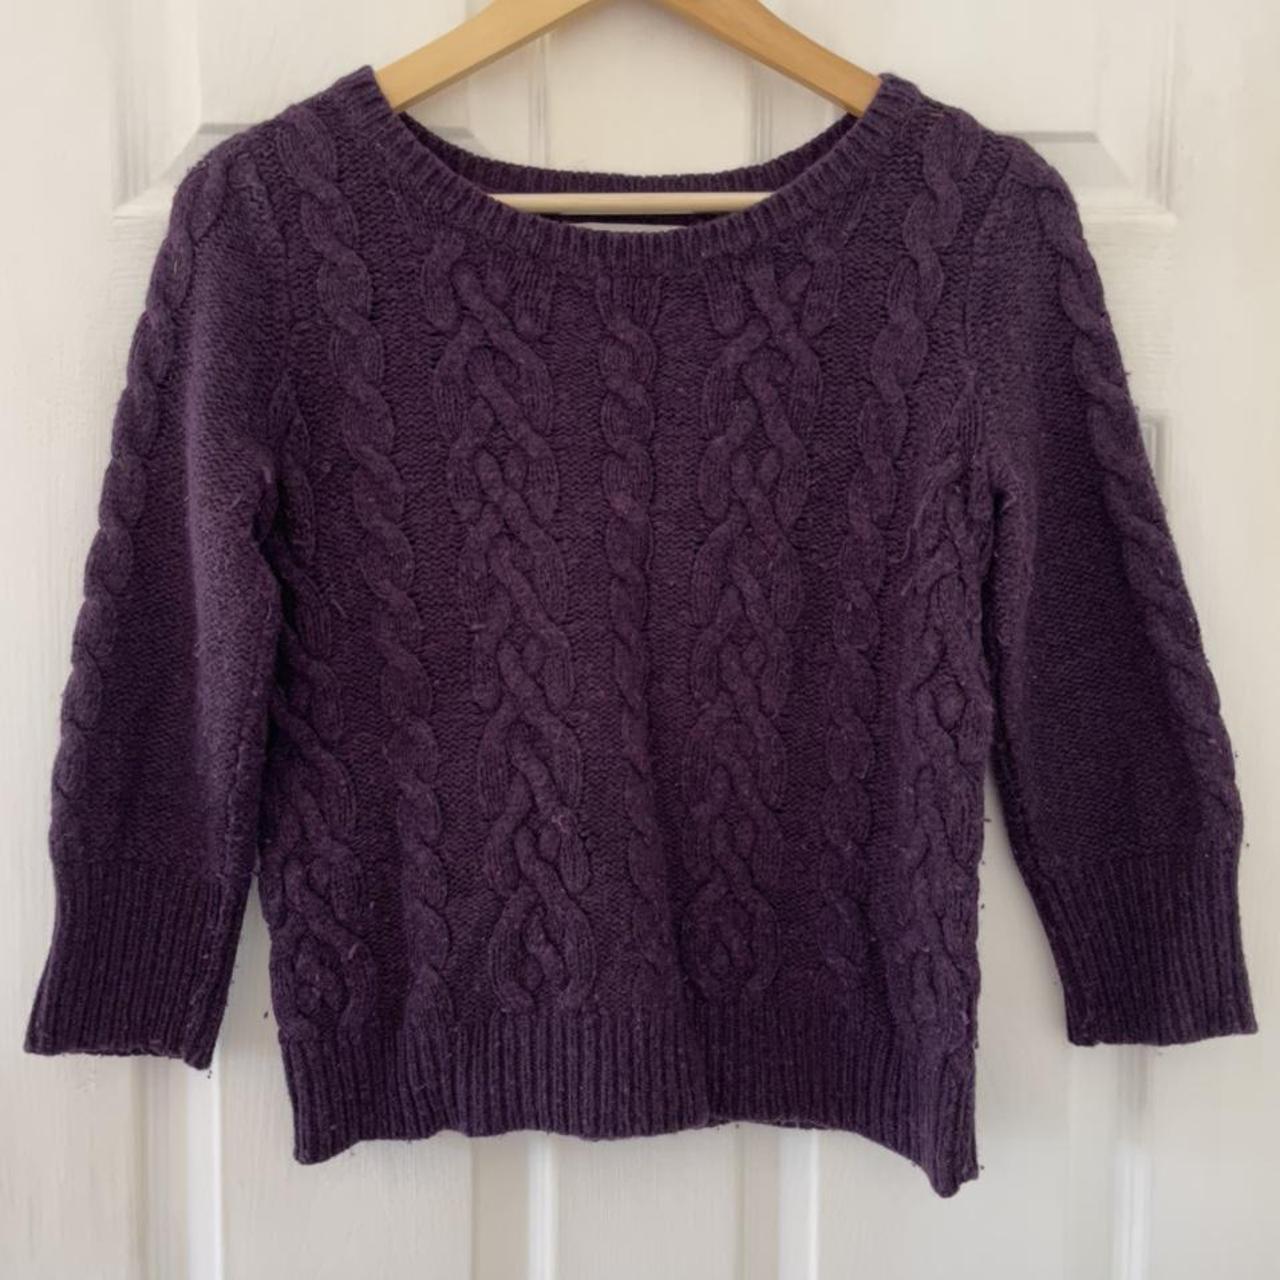 Product Image 2 - Cosy deep plum colored jumper